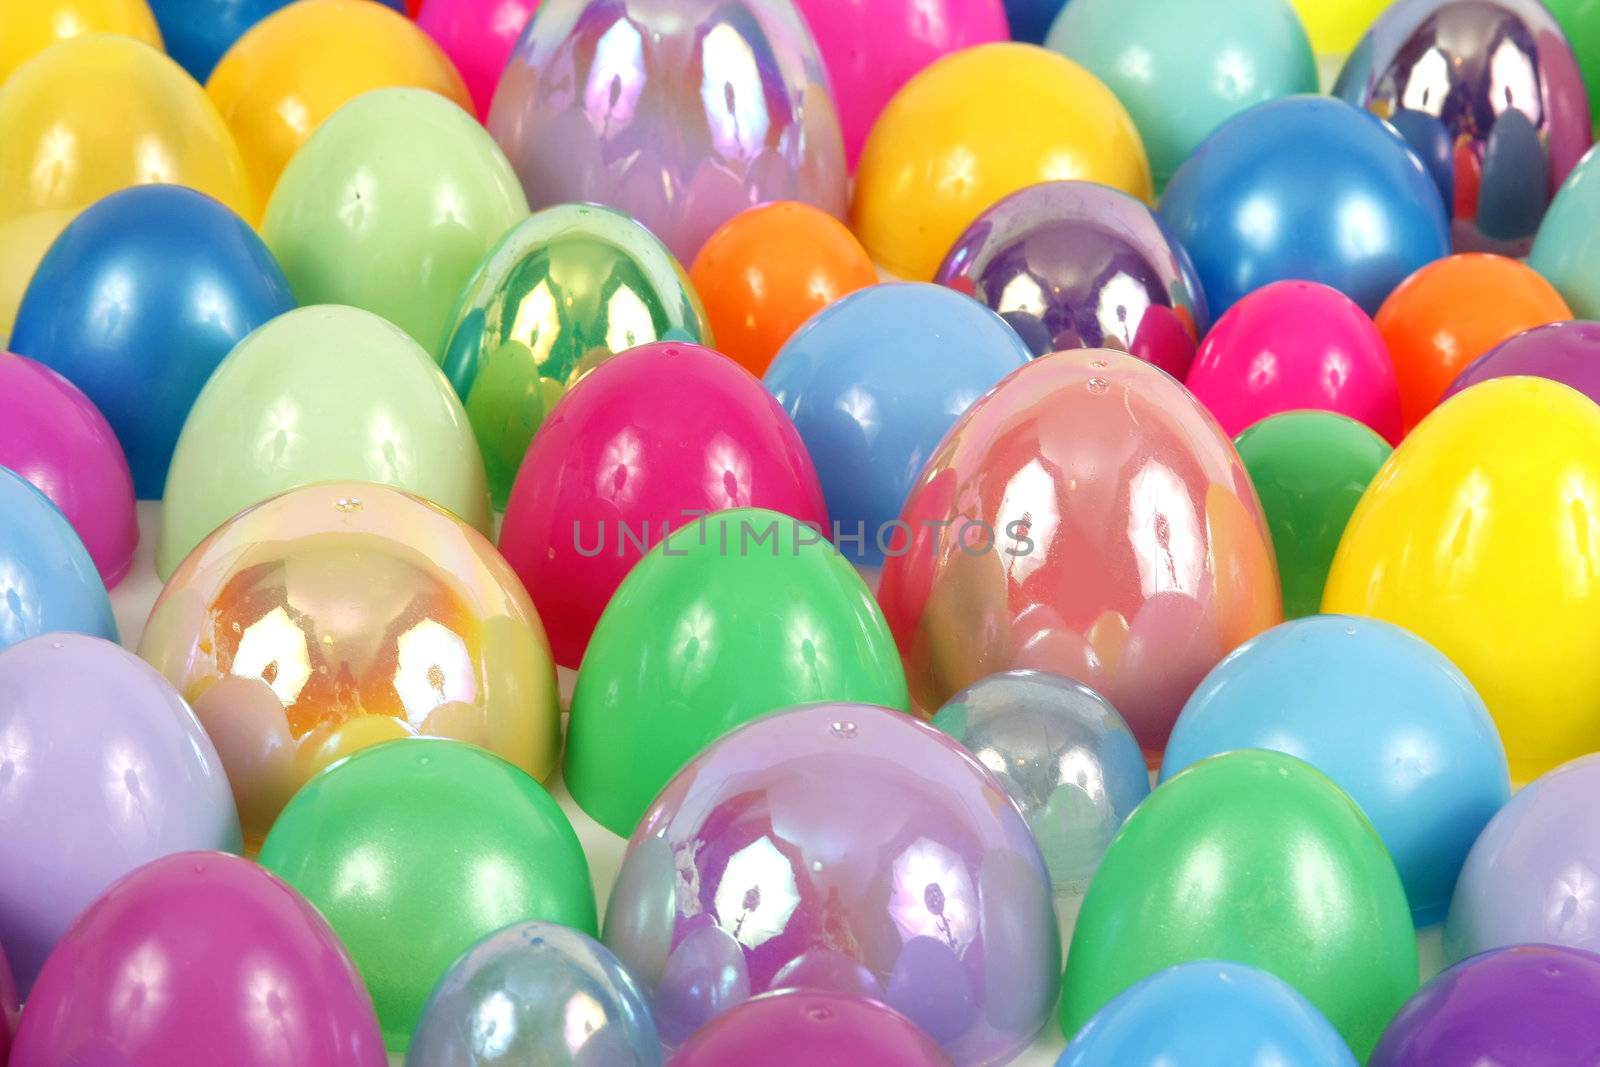 Many colorful easter eggs fill the screen.